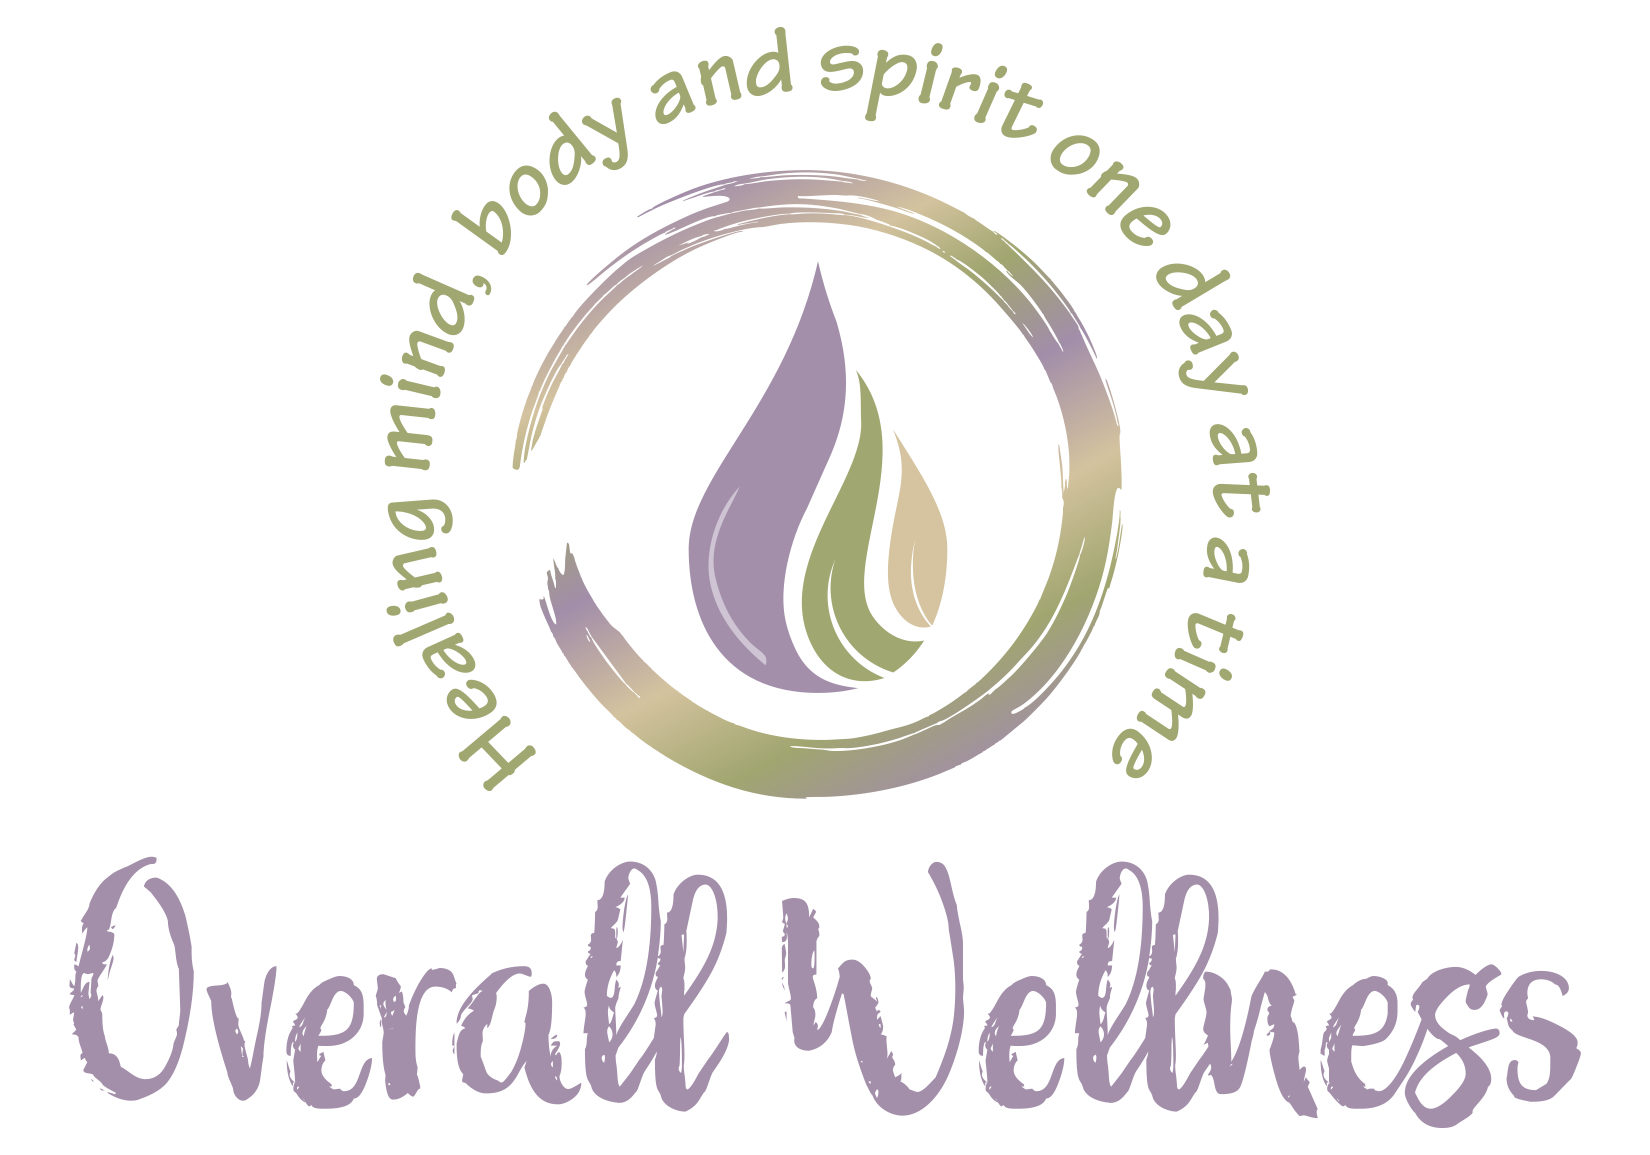 About Overall Wellness